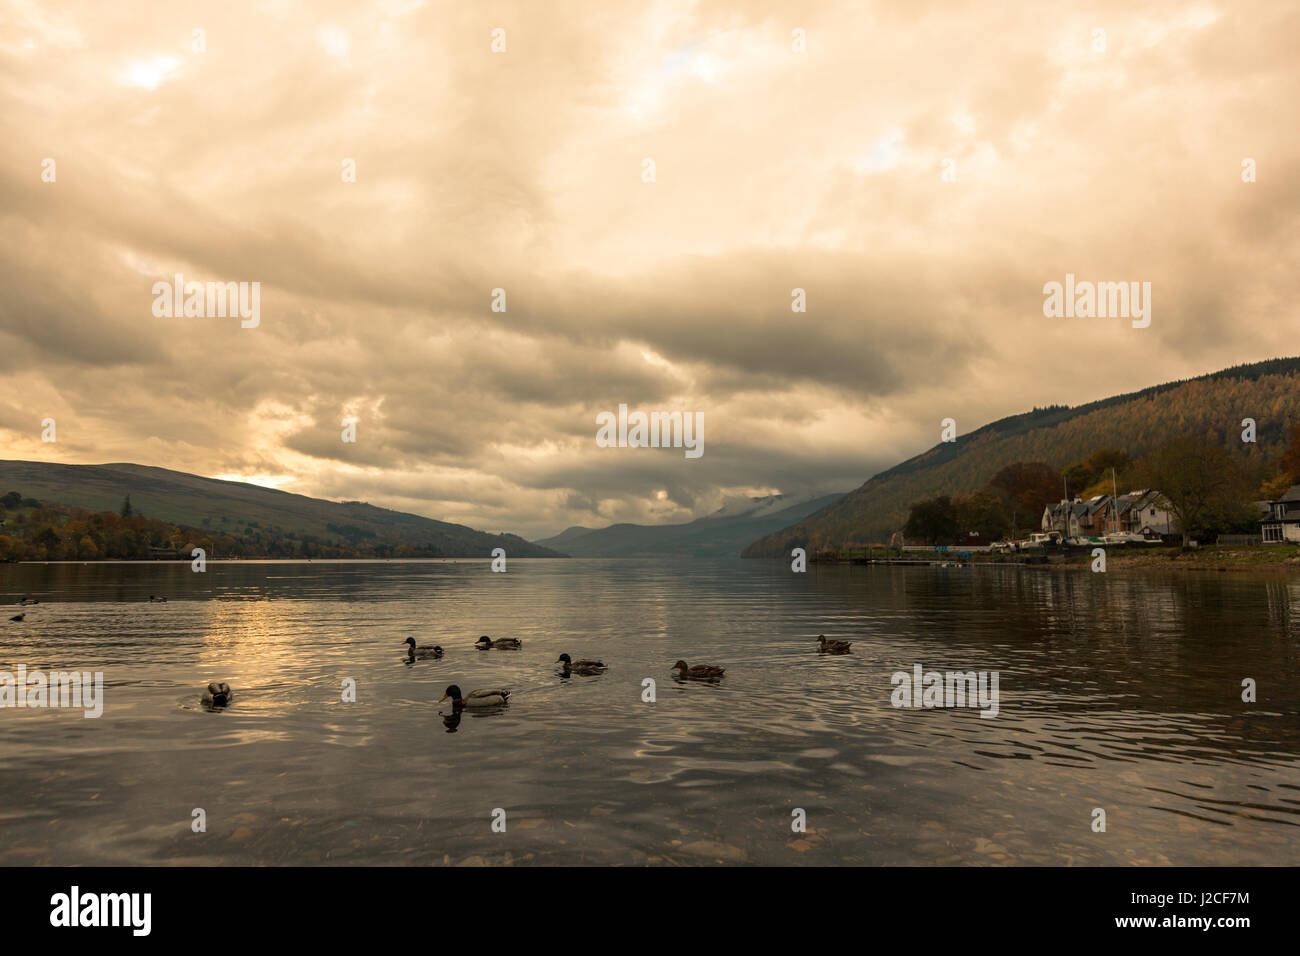 Some ducks paddle across the still water of Loch Tay at sunset. Kenmore, Perthshire, Scottish Highlands, Scotland Stock Photo